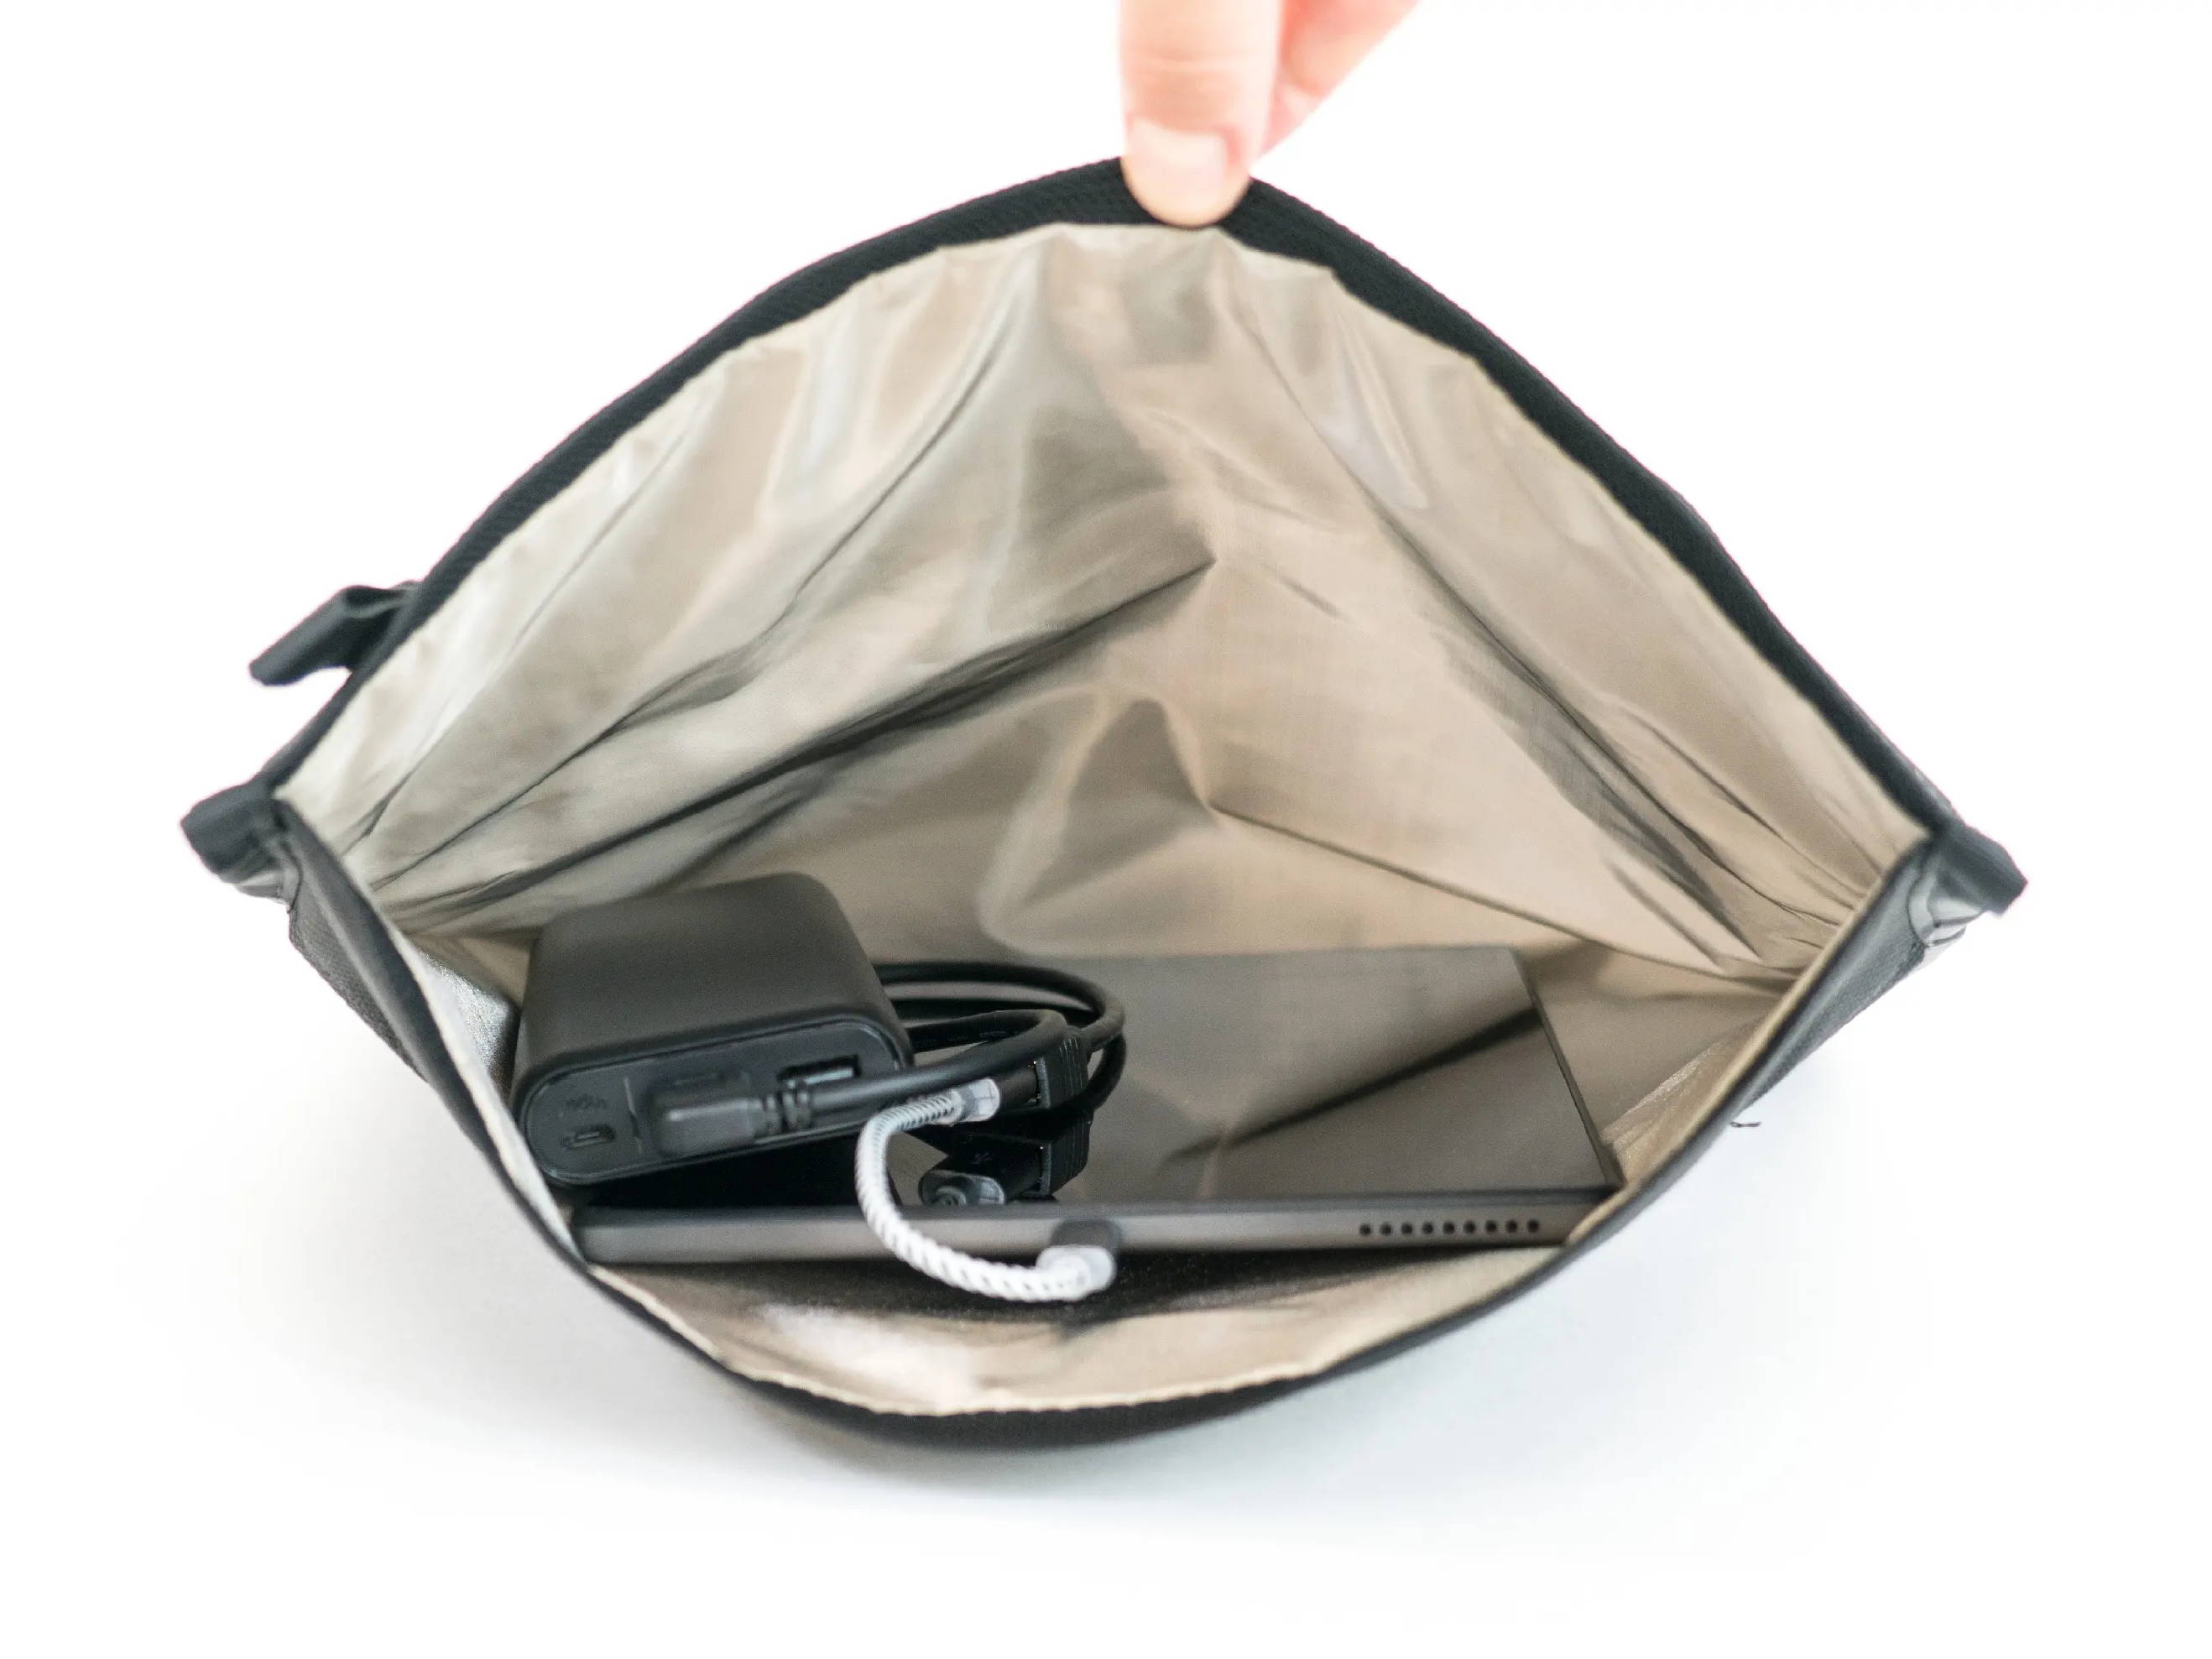 Tablet size faraday bag with neolok magnetic closure